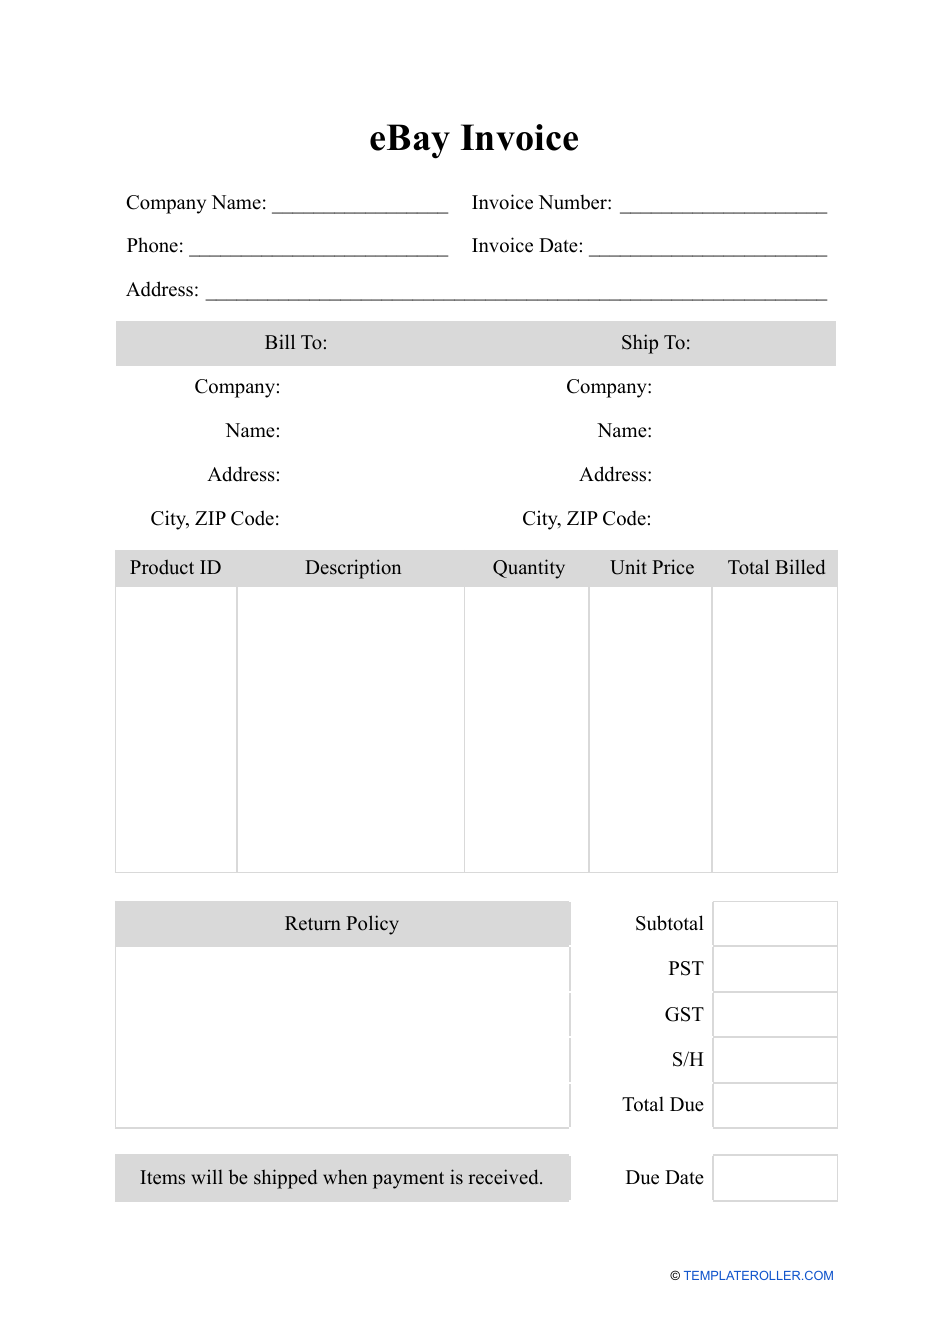 eBay Invoice Template, Page 1